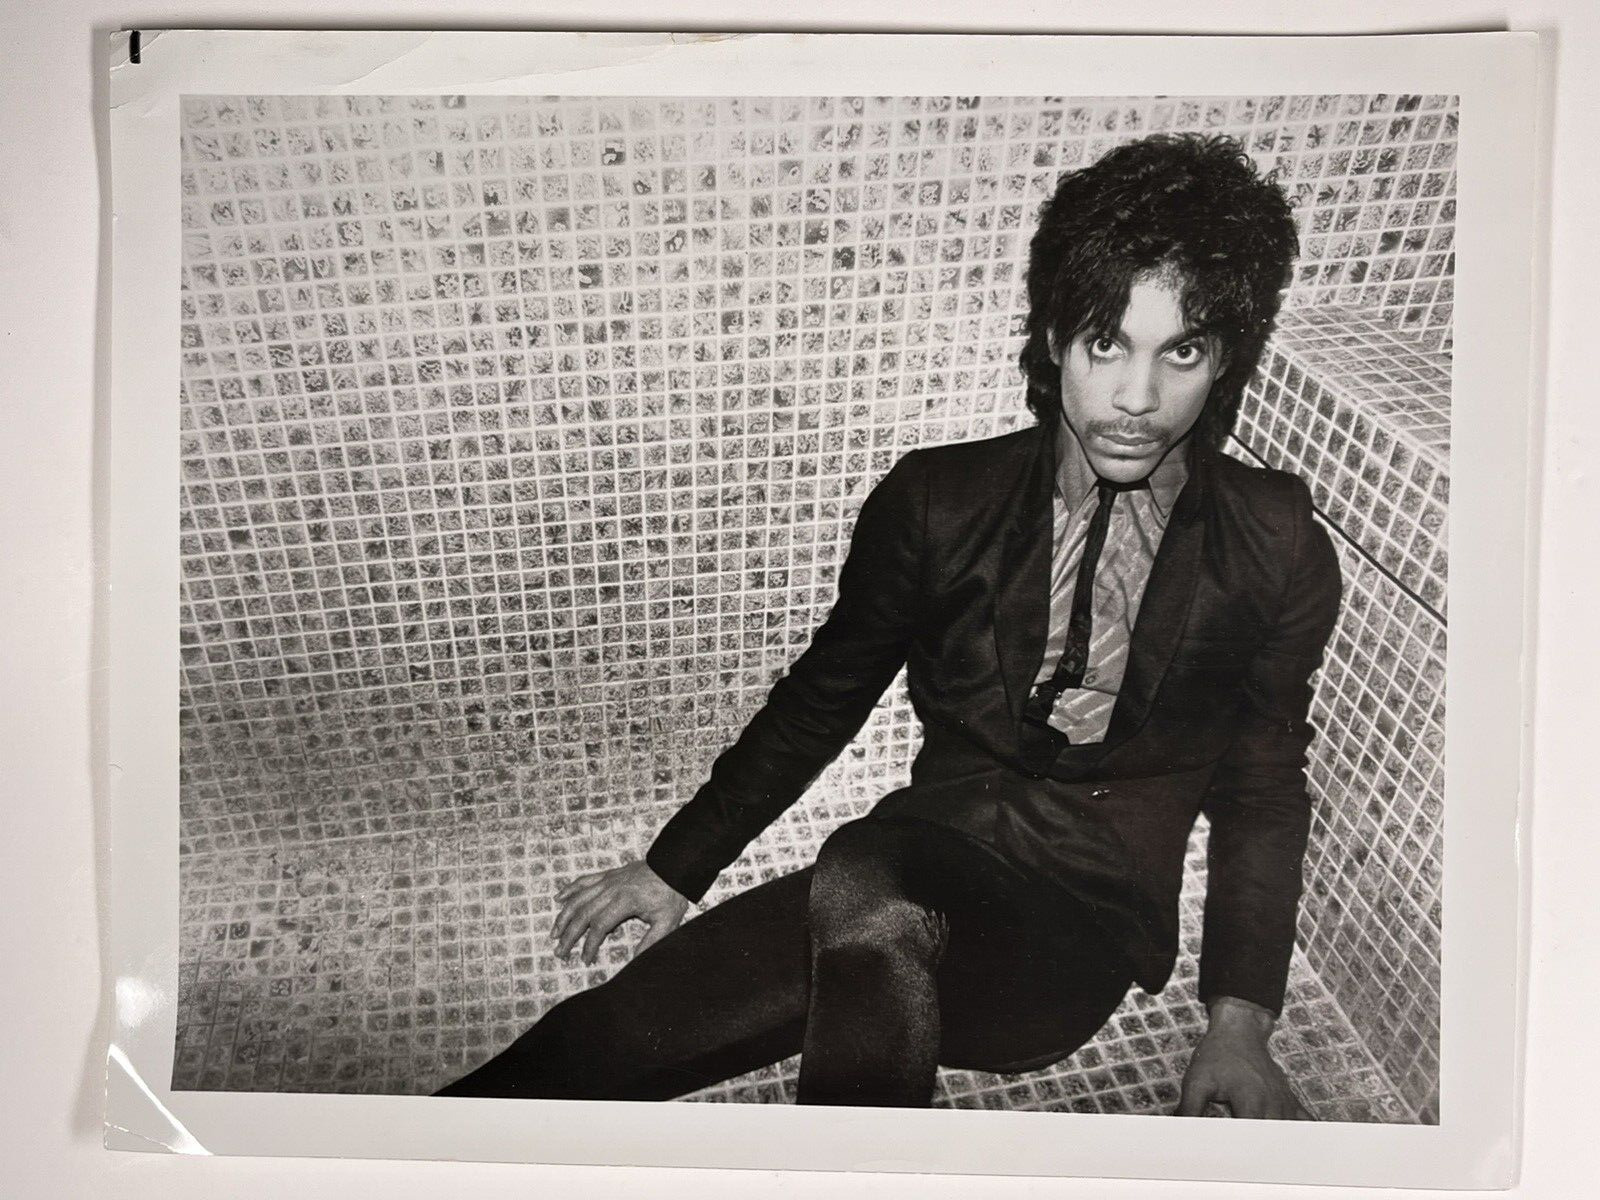 Prince Nelson Photograph Original Black And White Official Promotion Circa 80's